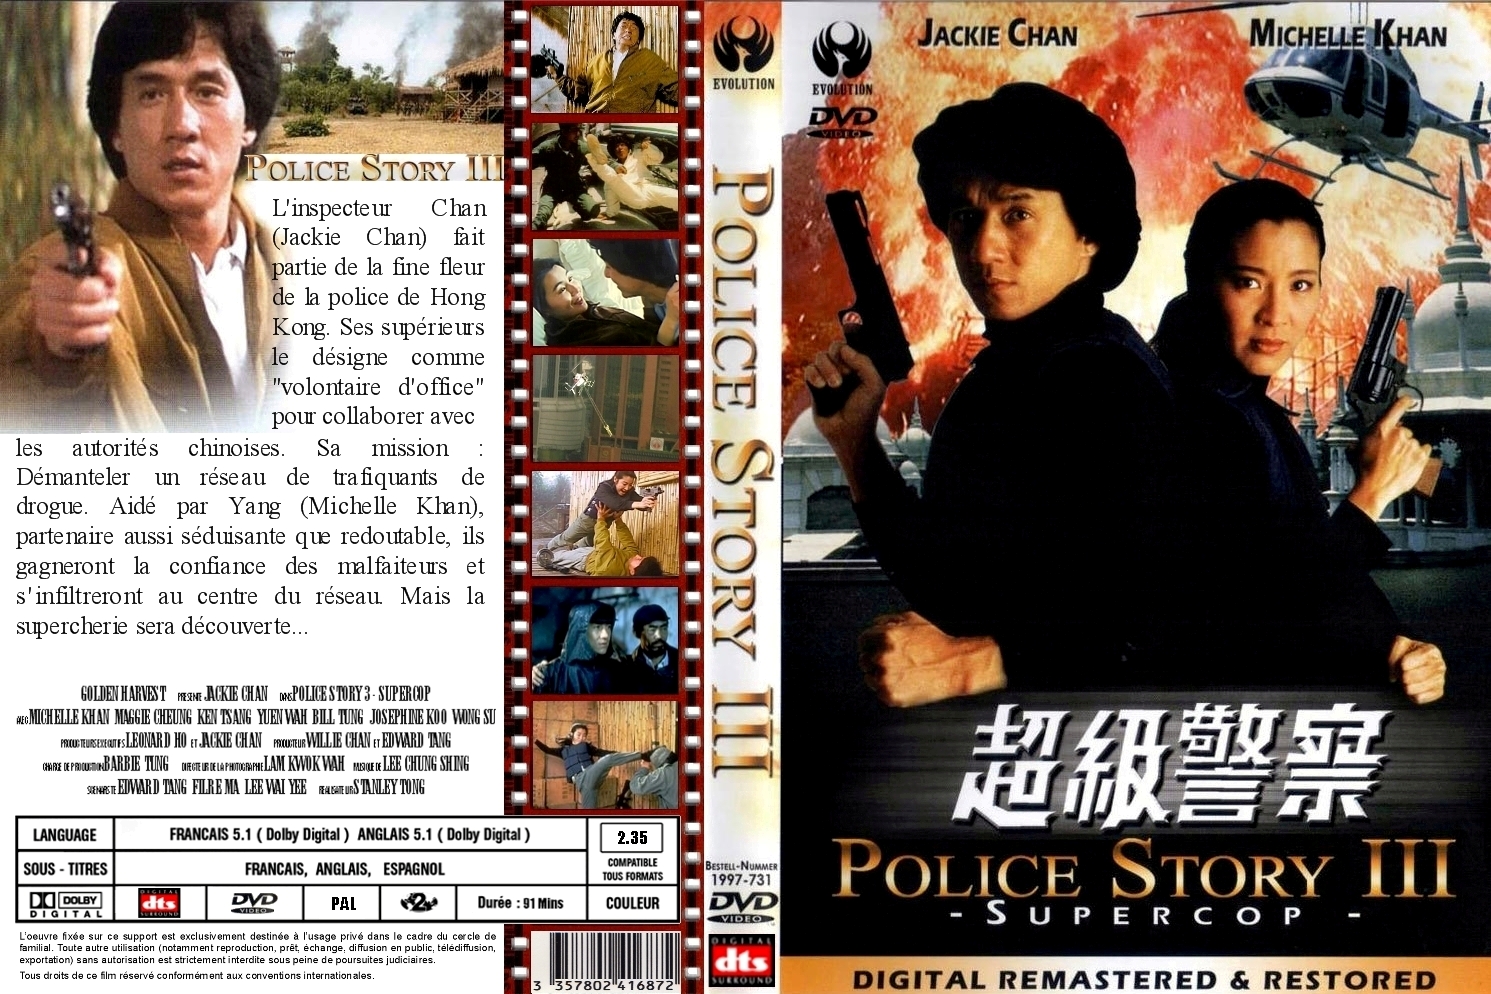 Jaquette DVD Police story 3 custom